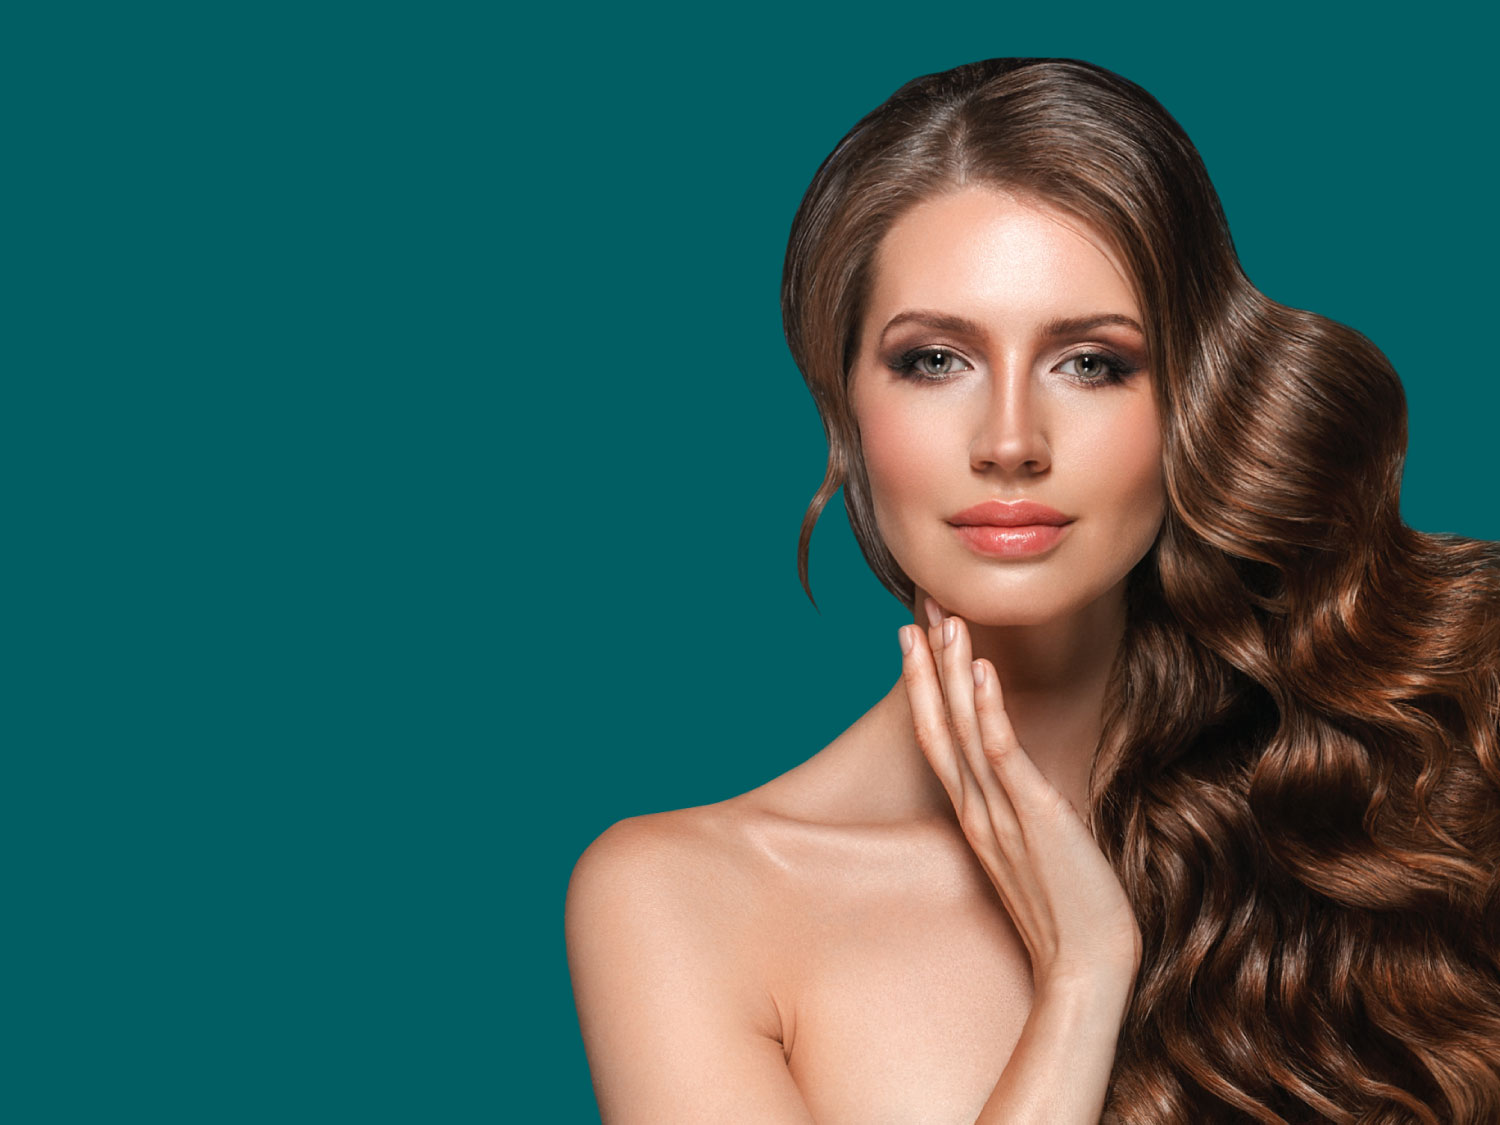 Luminology Aesthetics Clinic - A beautiful woman on a teal background